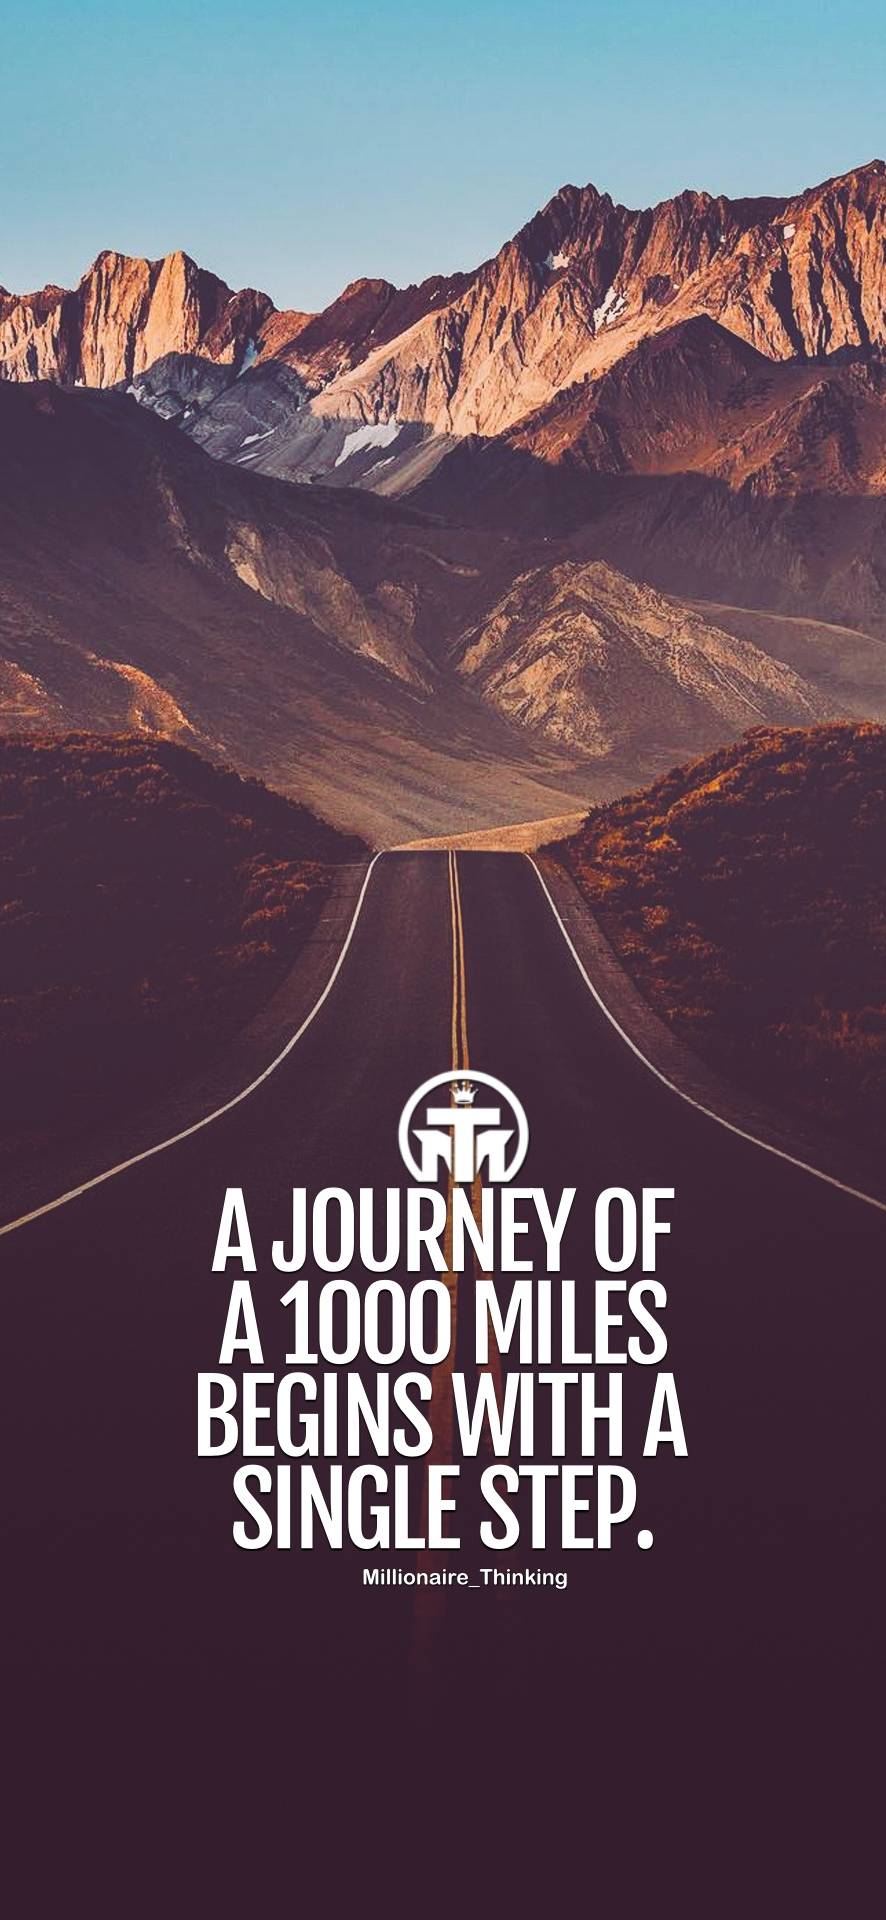 A Journey Of 1000 Miles Wallpaper - National Geographic Magazine November 2011 , HD Wallpaper & Backgrounds